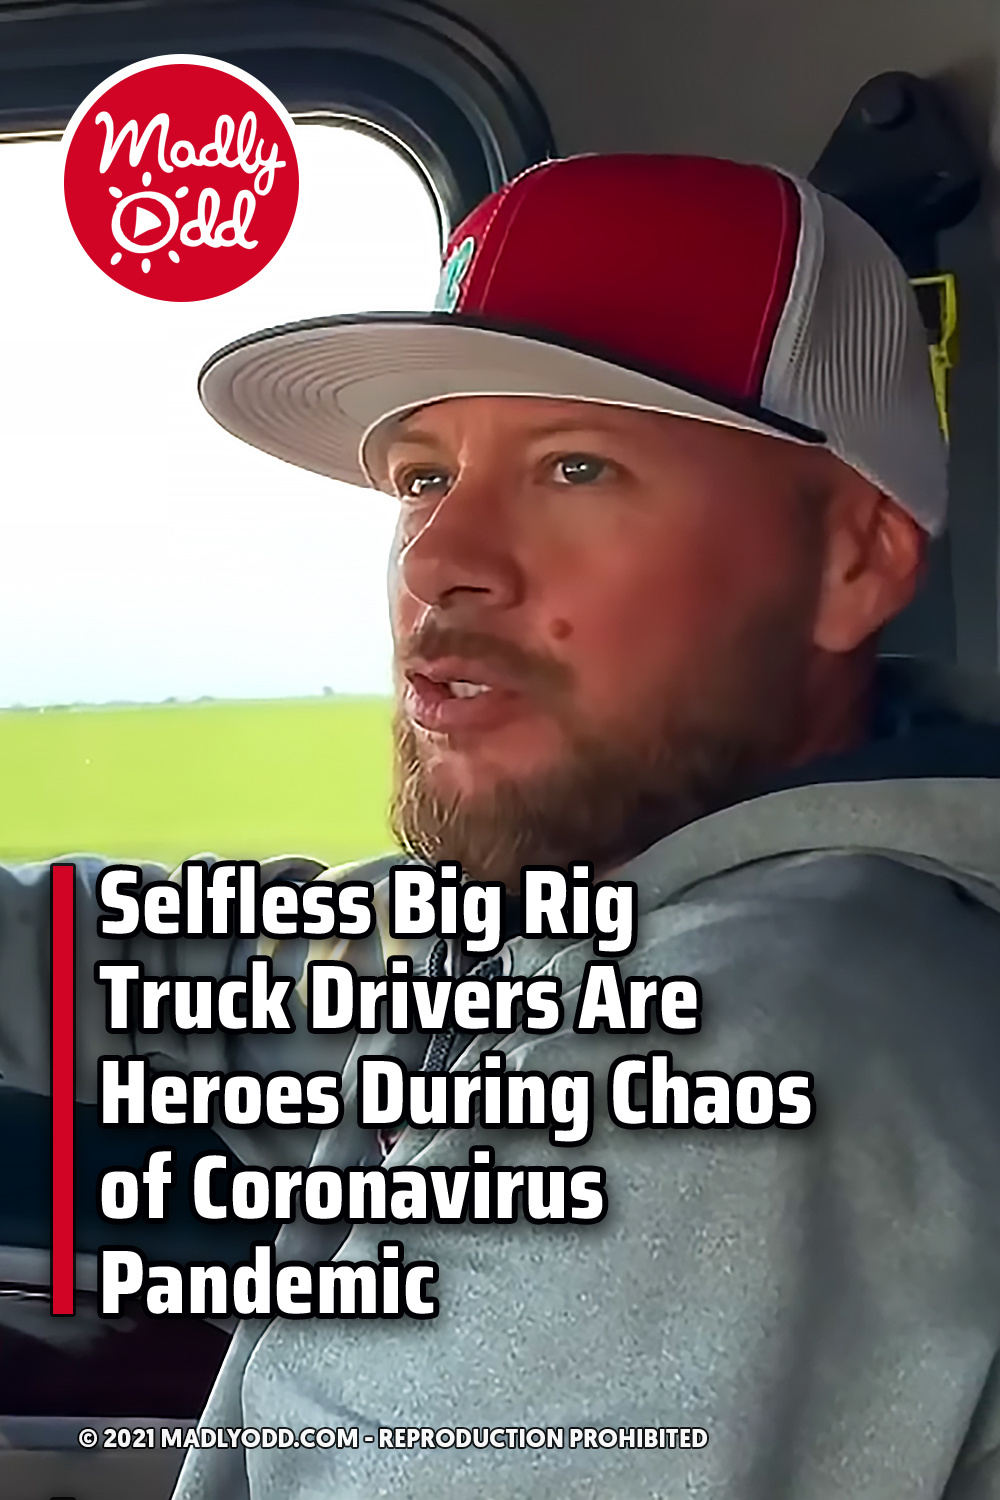 Selfless Big Rig Truck Drivers Are Heroes During Chaos of Coronavirus Pandemic